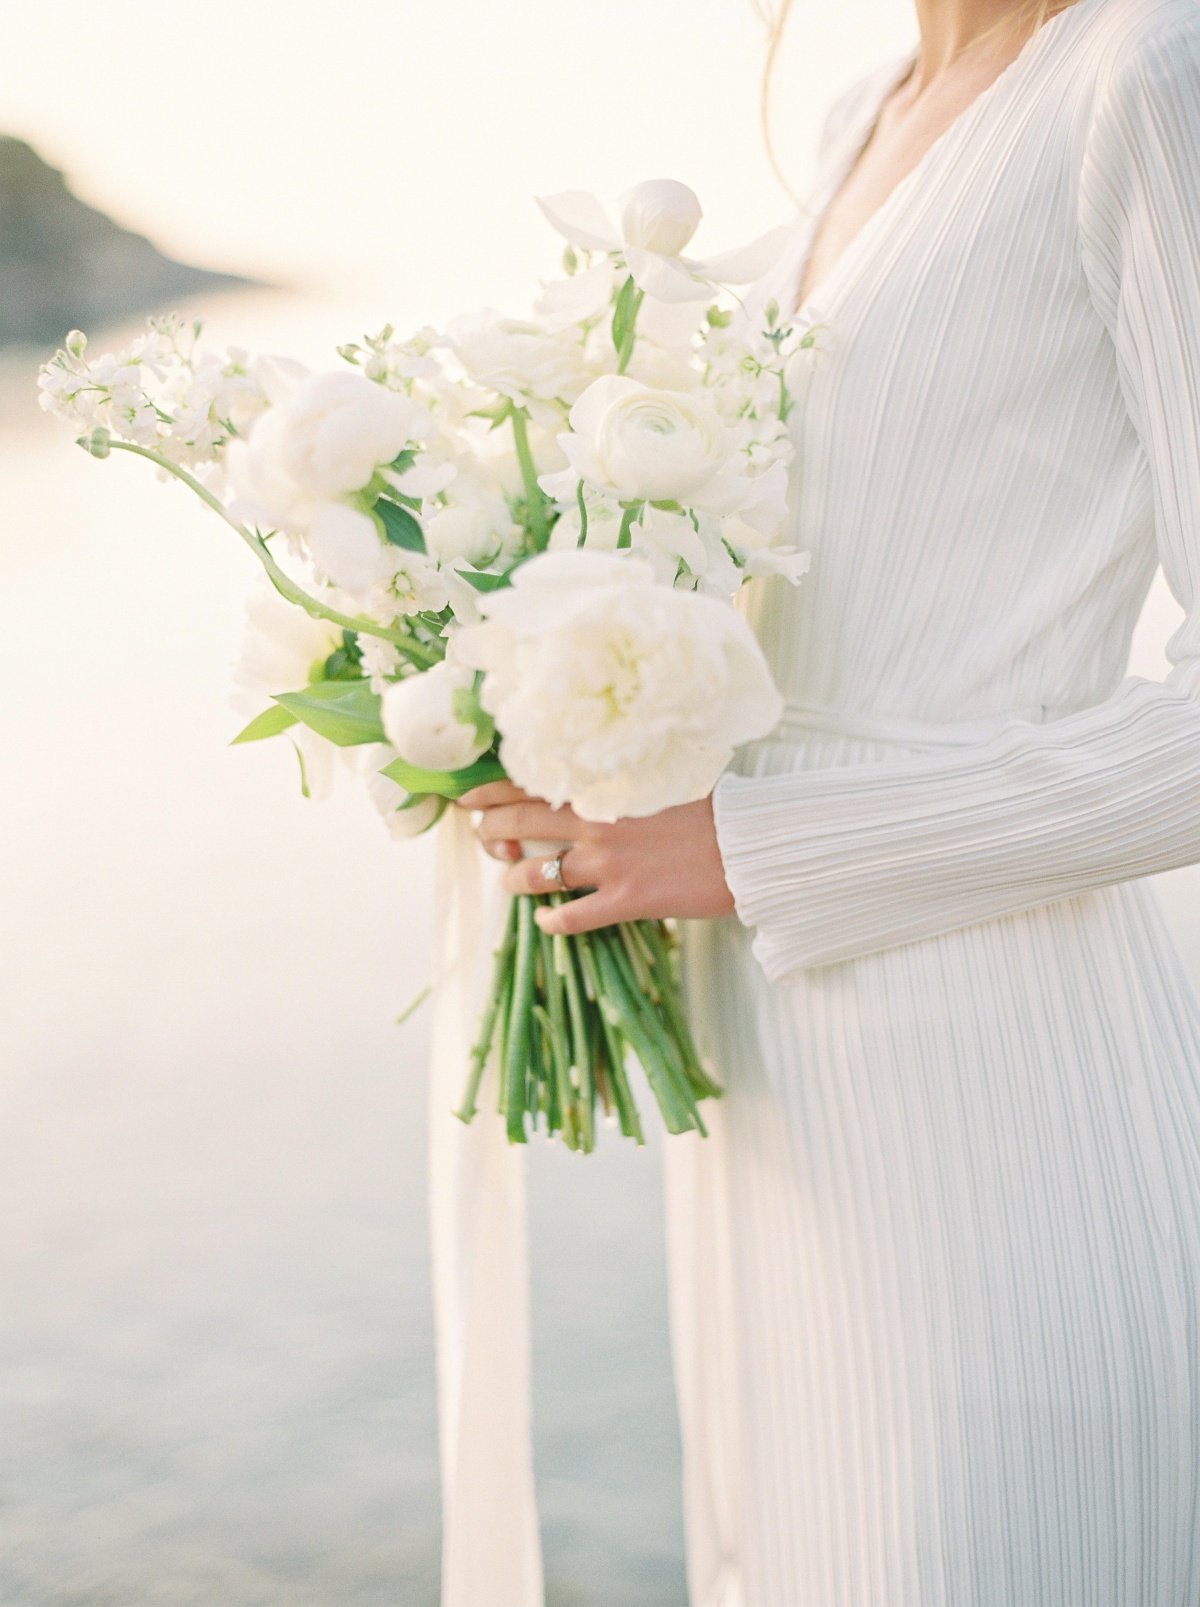 white bridal bouquet wiht ranunvulus and peonies for a destination wedding in greece